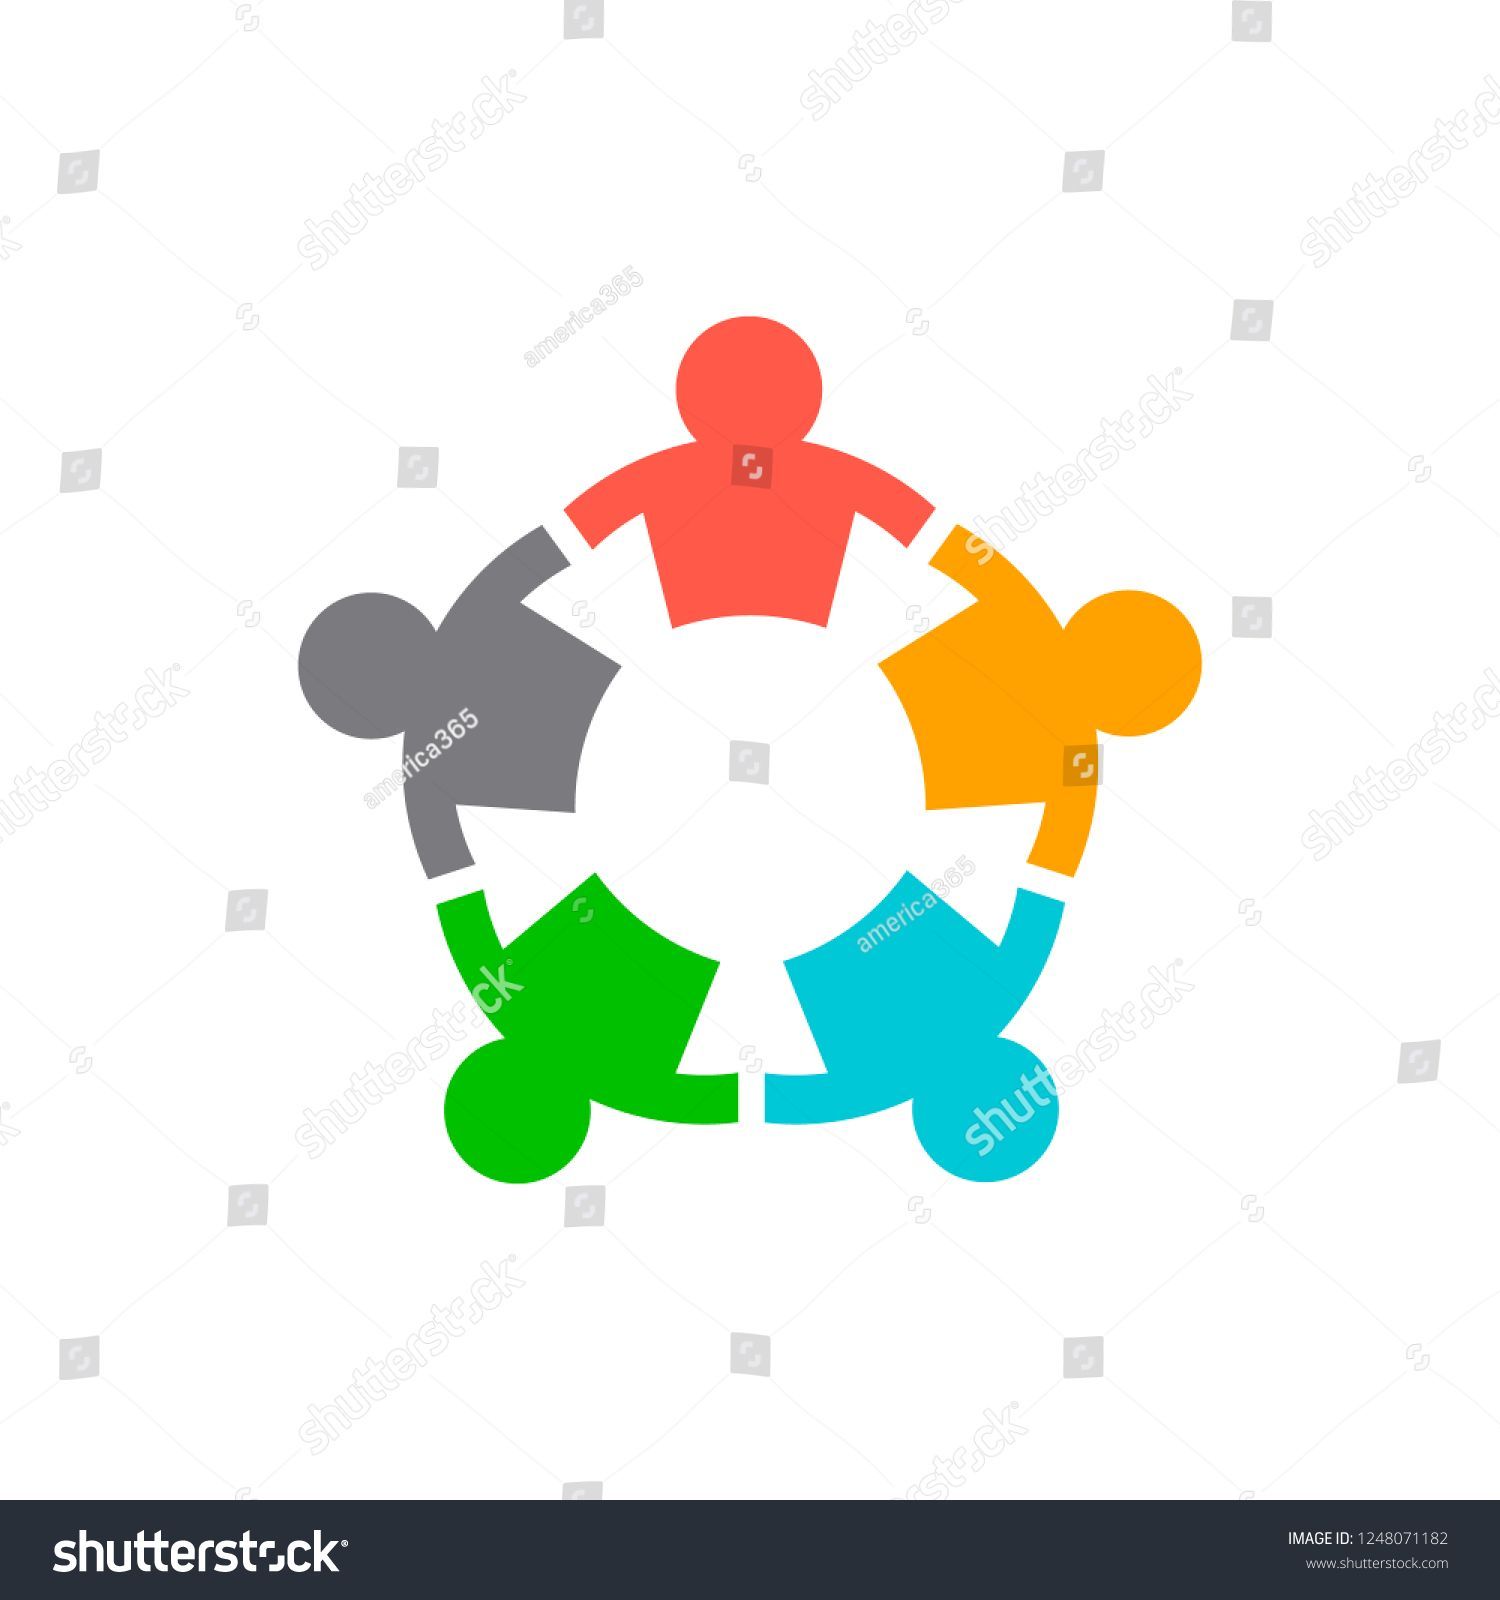 Business Teamwork consultants conference vector illustration